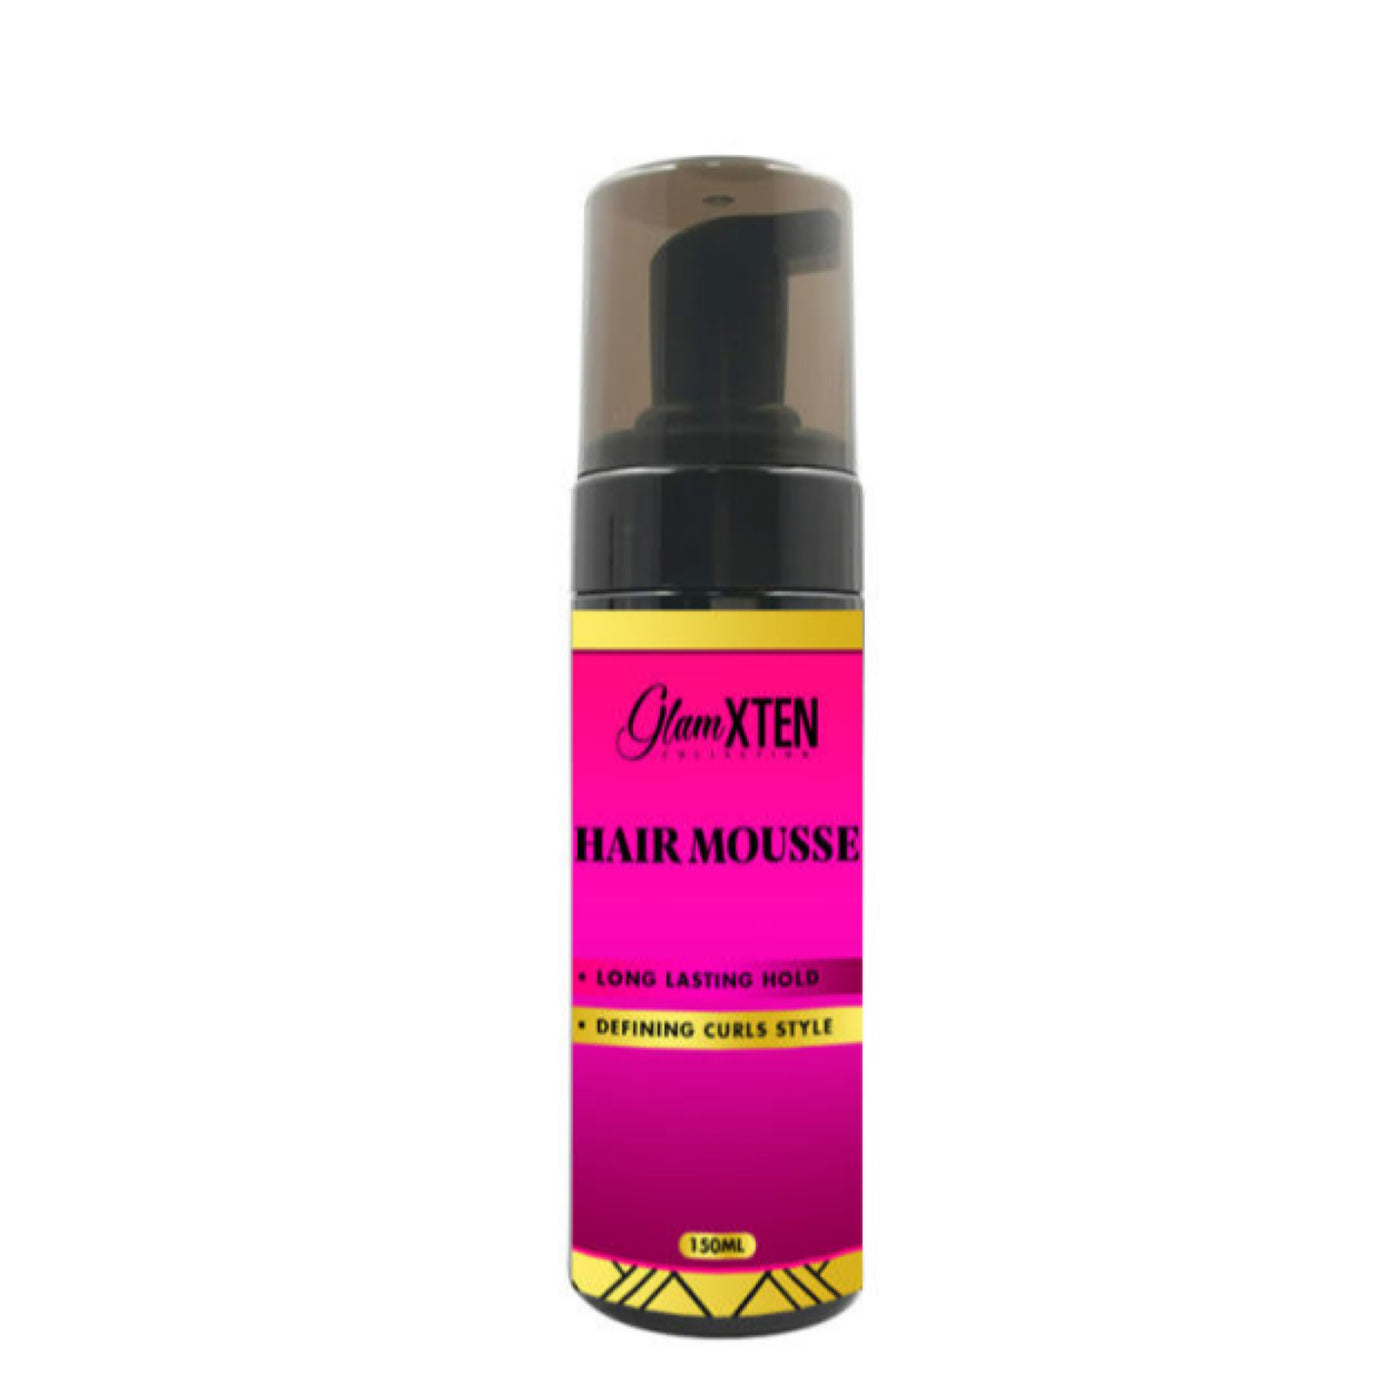 Hair Mousse - Glam Xten Collection